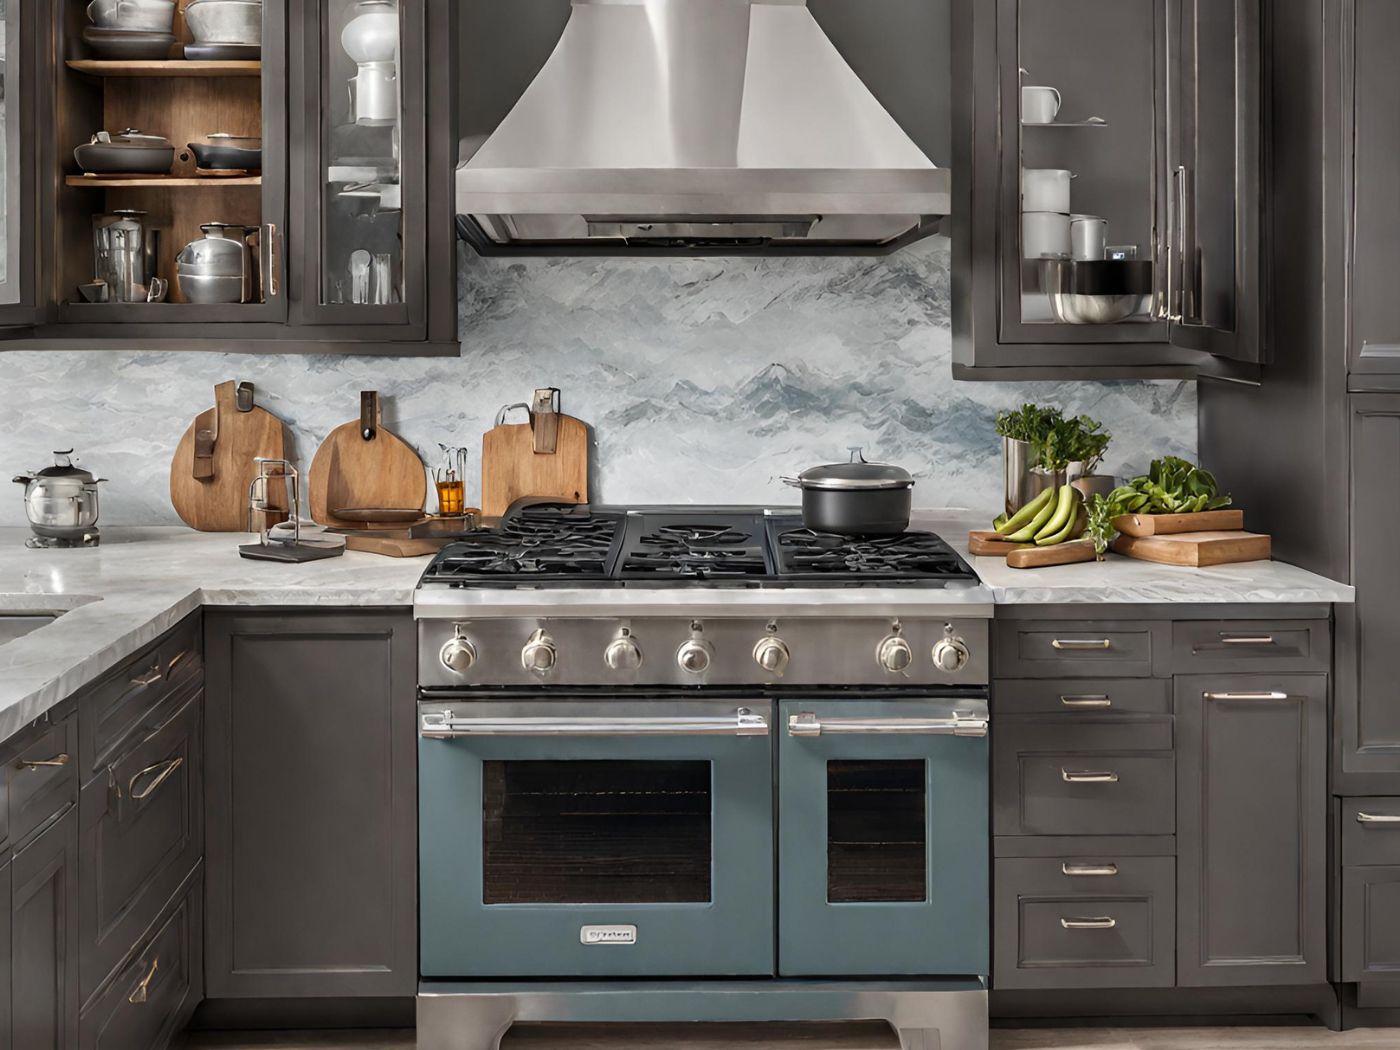 The Ultimate Guide to Choosing the Perfect Kitchen Appliance Induction, Electric, or Gas Stove